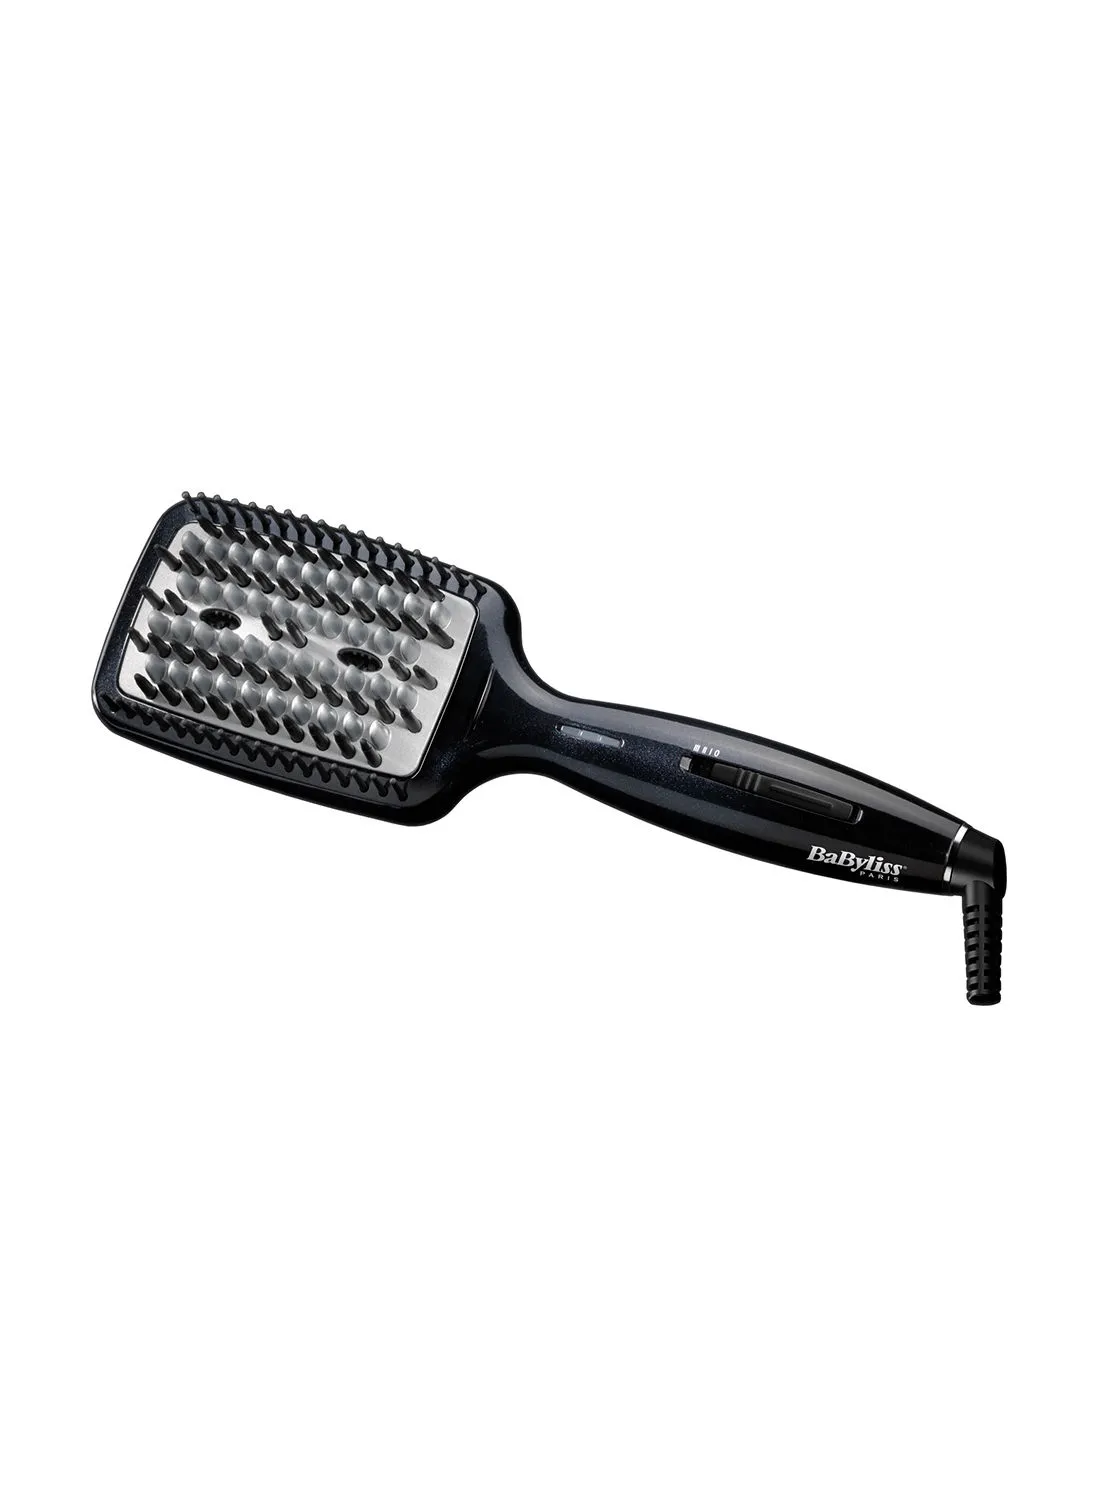 babyliss Hair Straightening | 3d Tech Hot Brush For Versatile Styling And Smooth Results | Black Design For A Sleek | Durable Construction For Long-lasting Performance | HSB101SDE Black